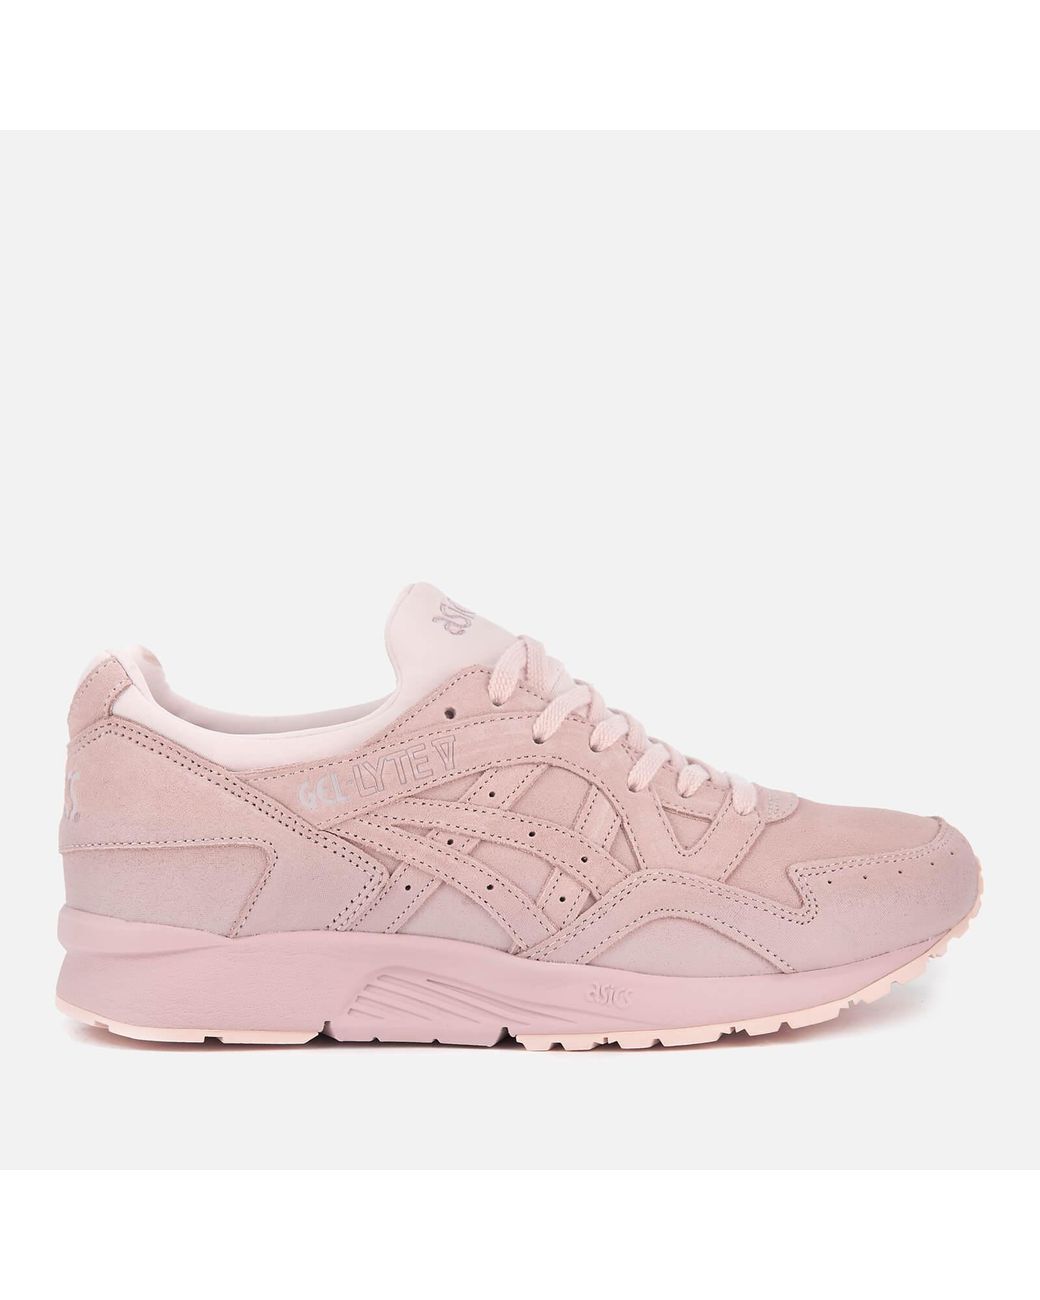 Asics Gel-lyte V Suede Trainers in Cream/Pink (Pink) | Lyst